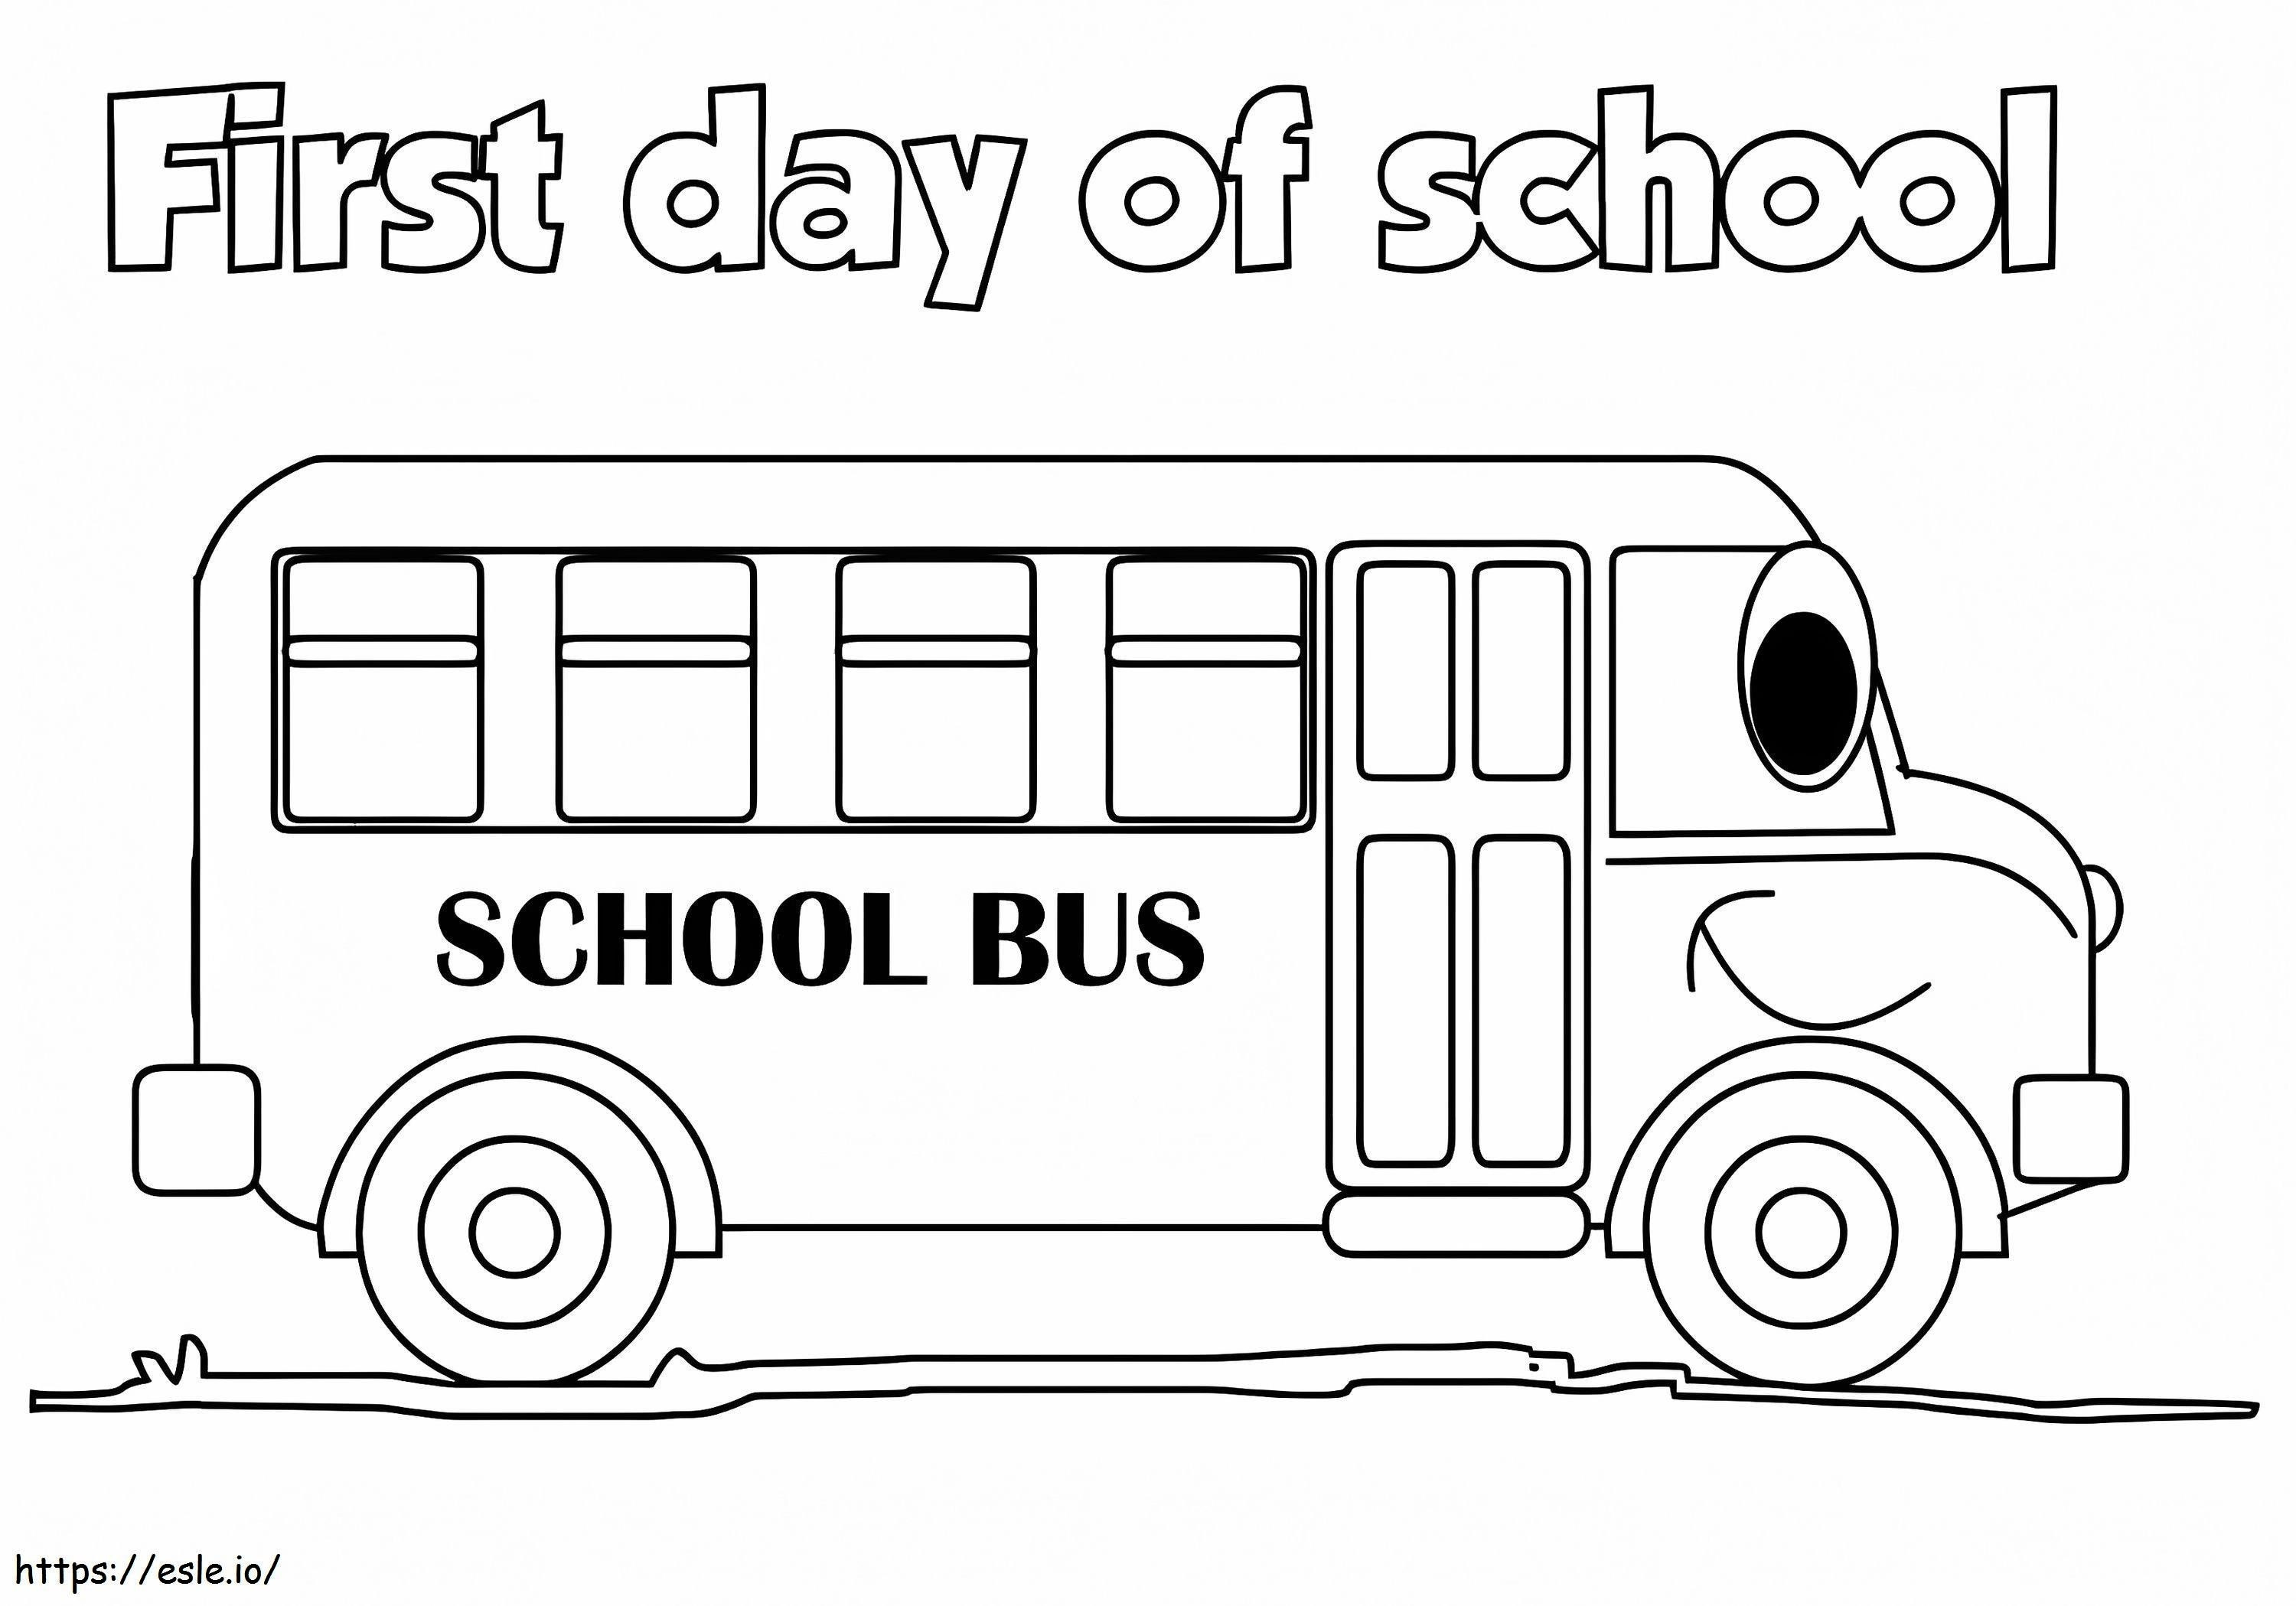 School Bus First Day Of School coloring page